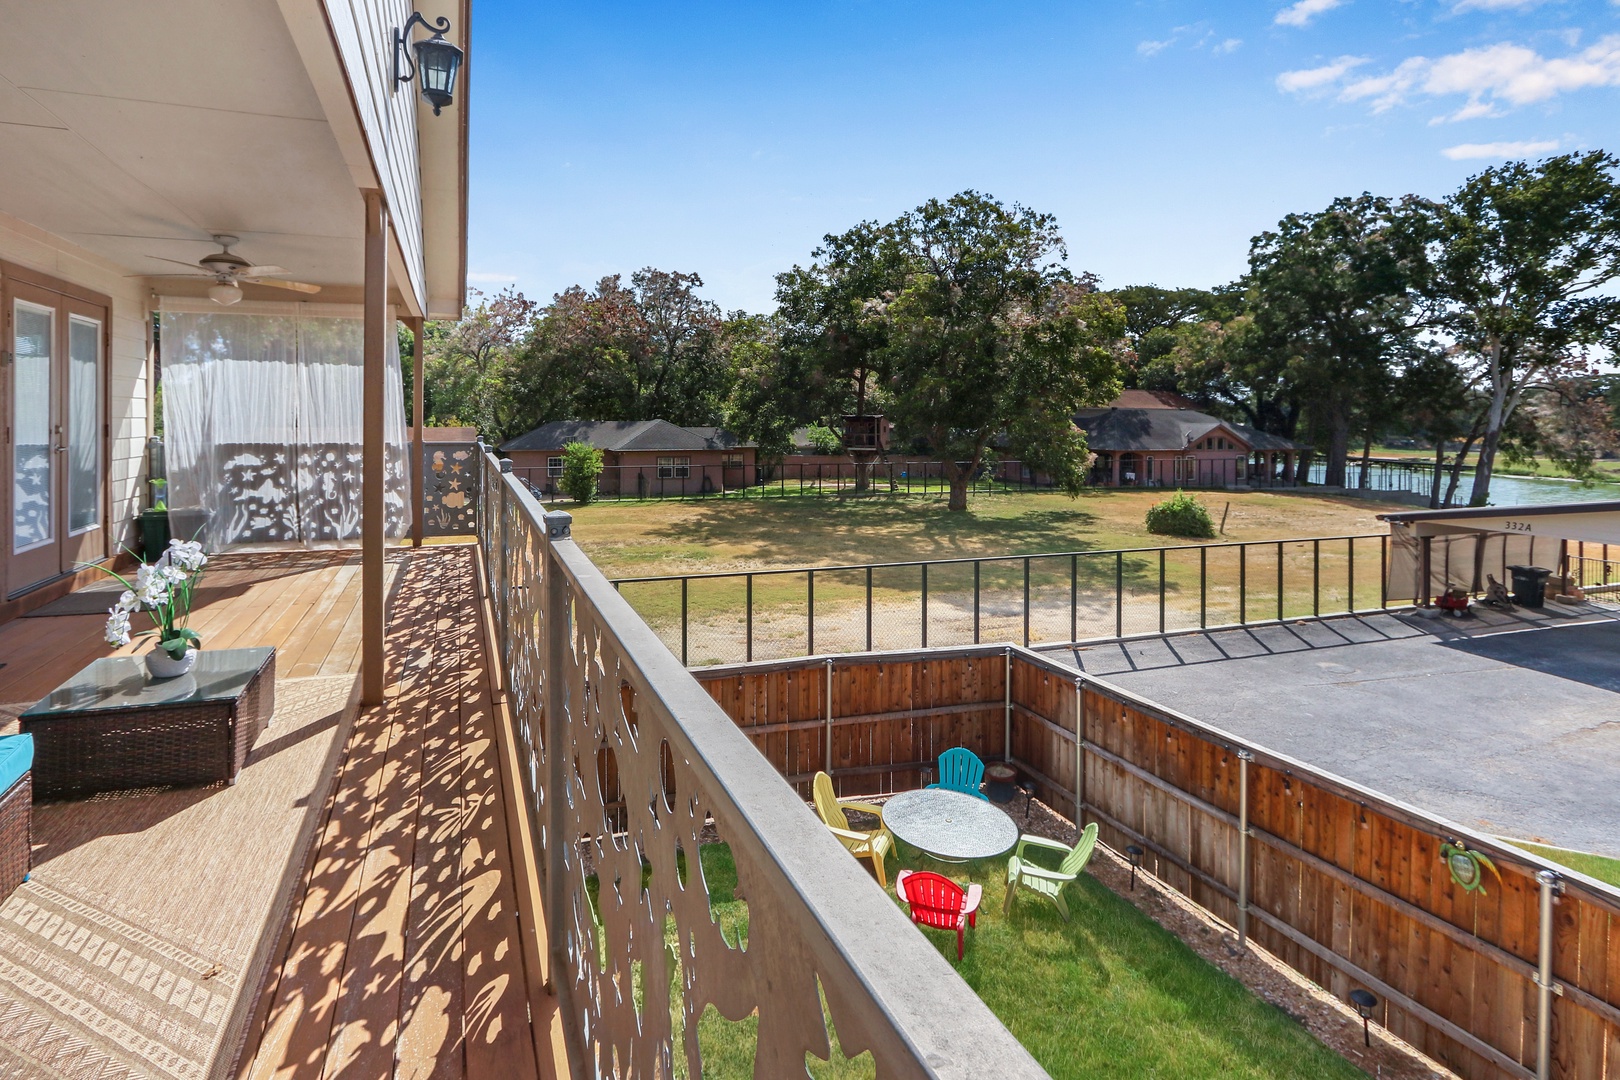 The 2nd level back deck overlooks the spacious fenced back yard